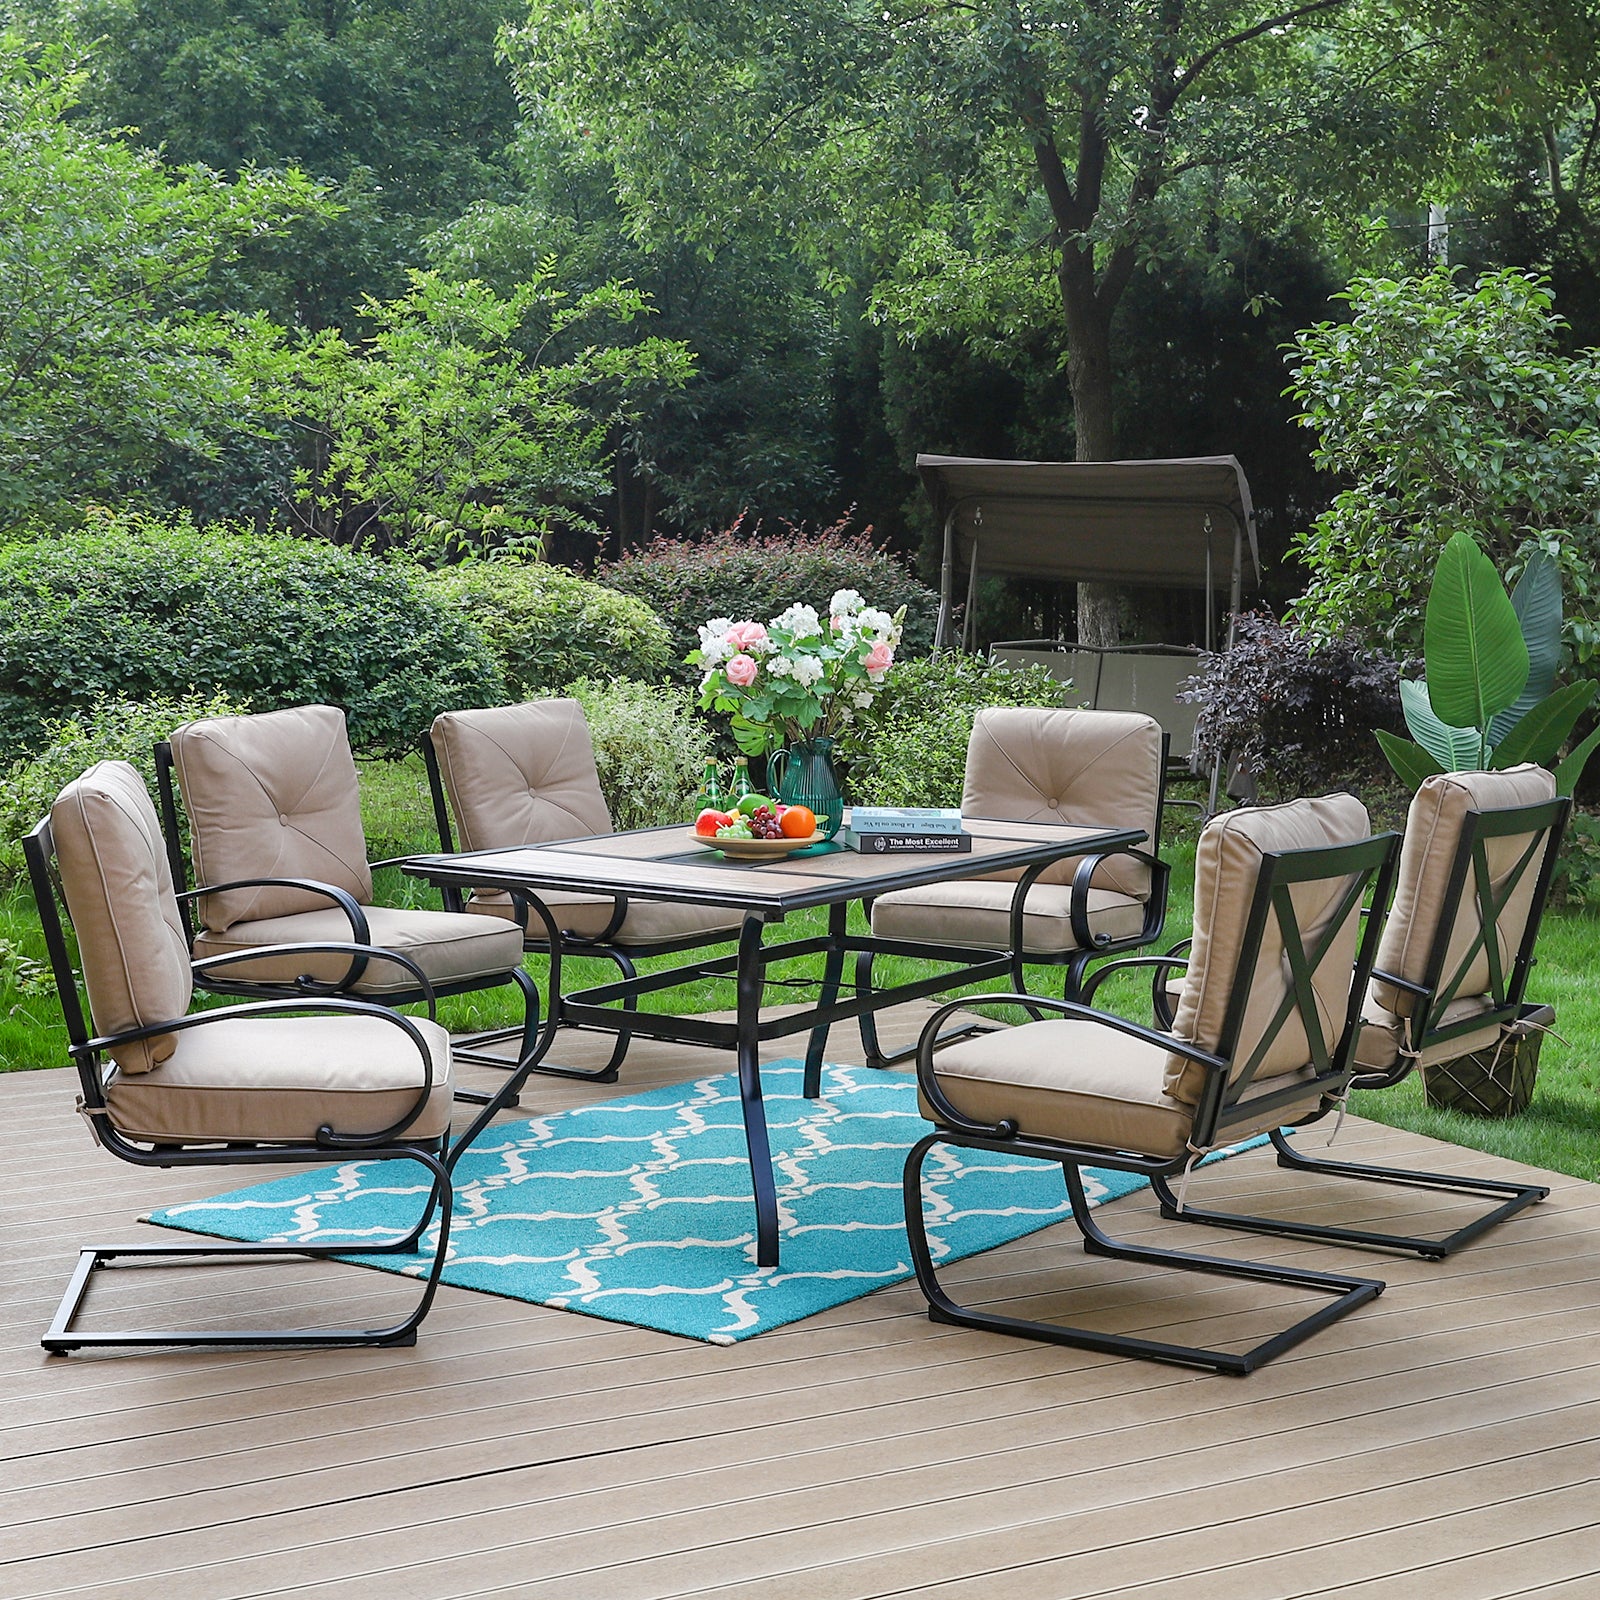 Sophia & William Geometric Table & 6 Cushioned C-spring Dining Chairs Outdoor Patio Dining Set